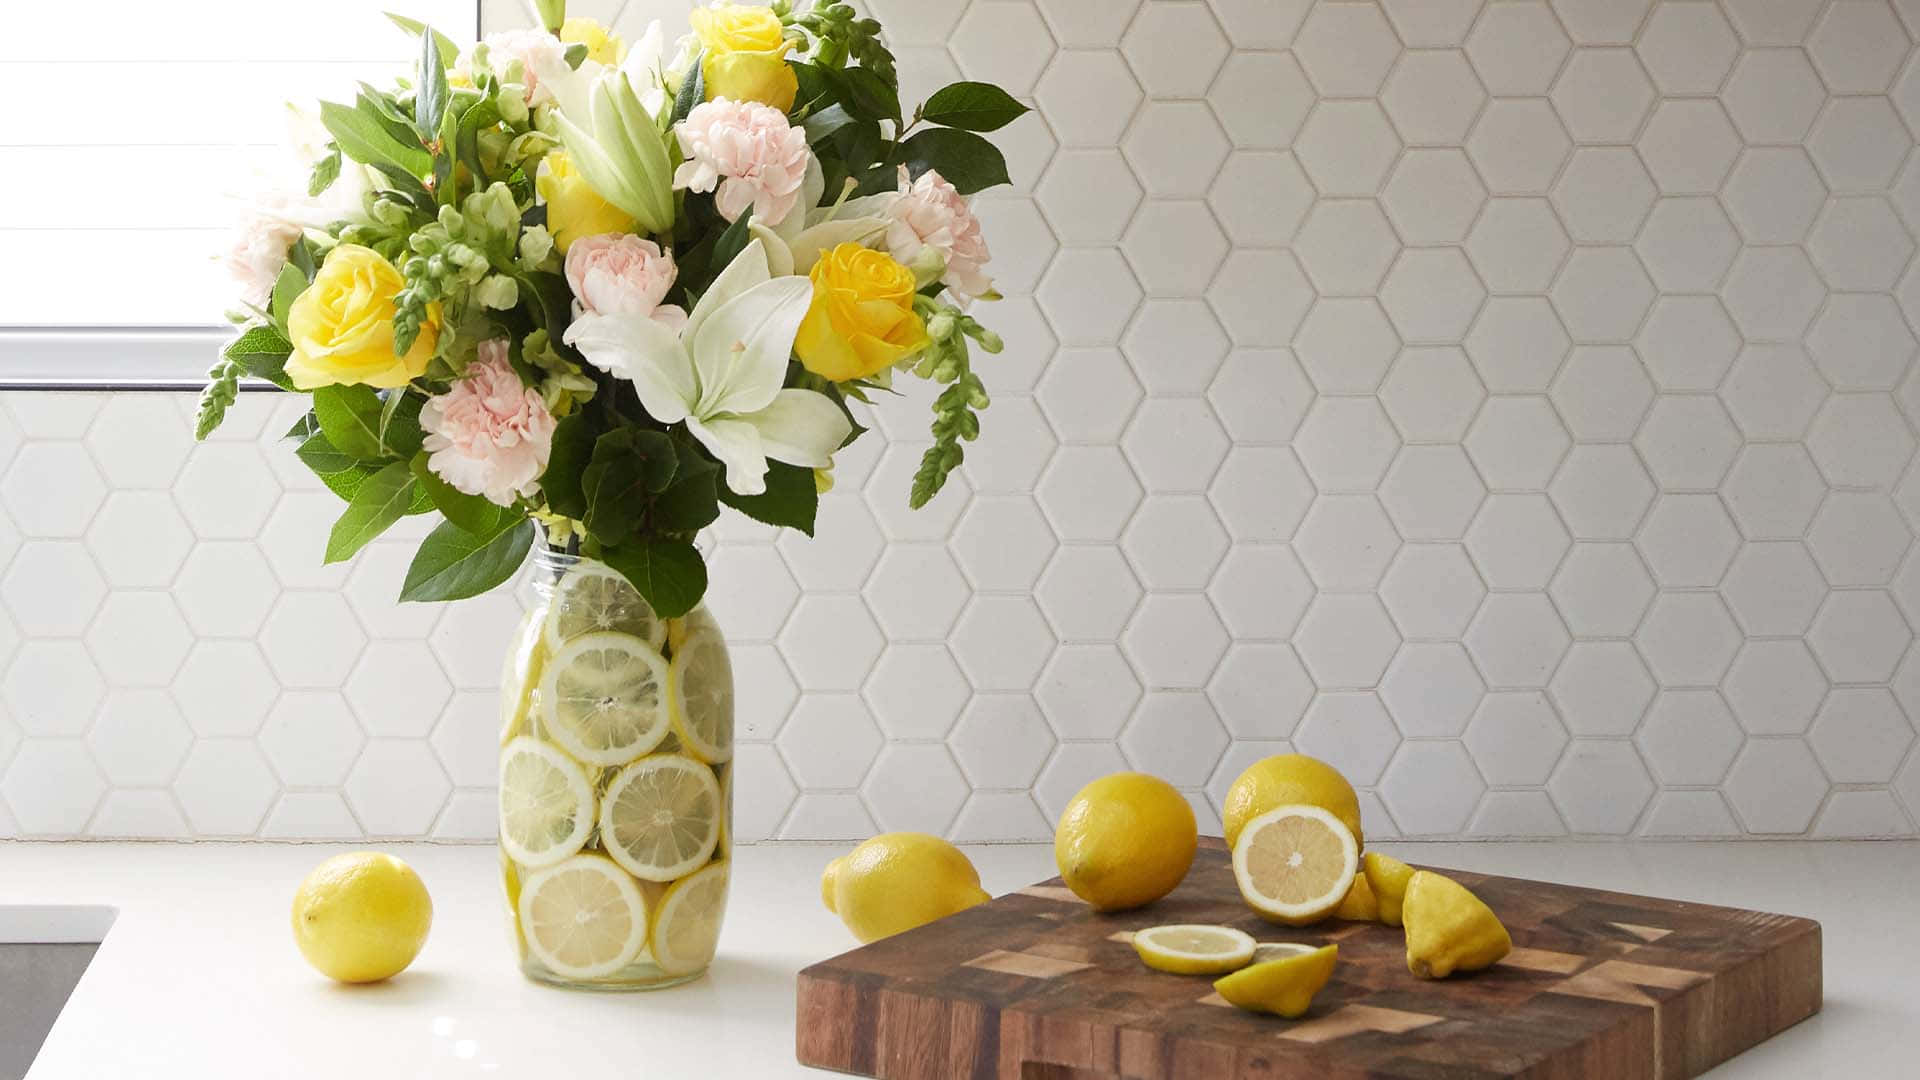 A Vase Of Flowers And Lemons On A Cutting Board